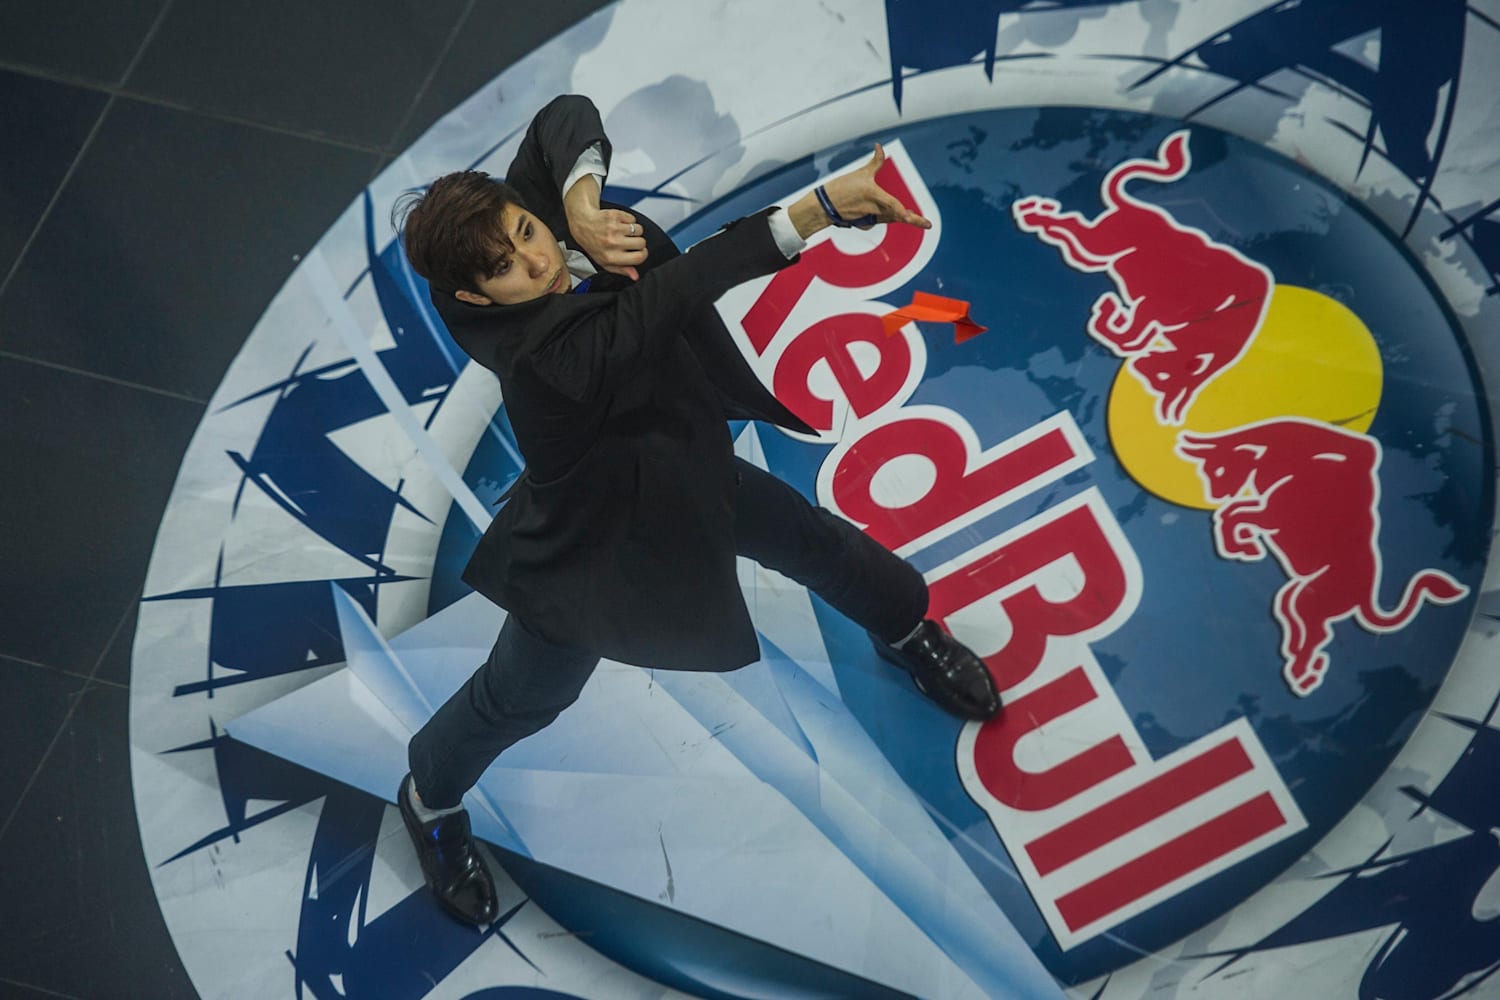 Red Bull Paper Wings World Final report and action clip